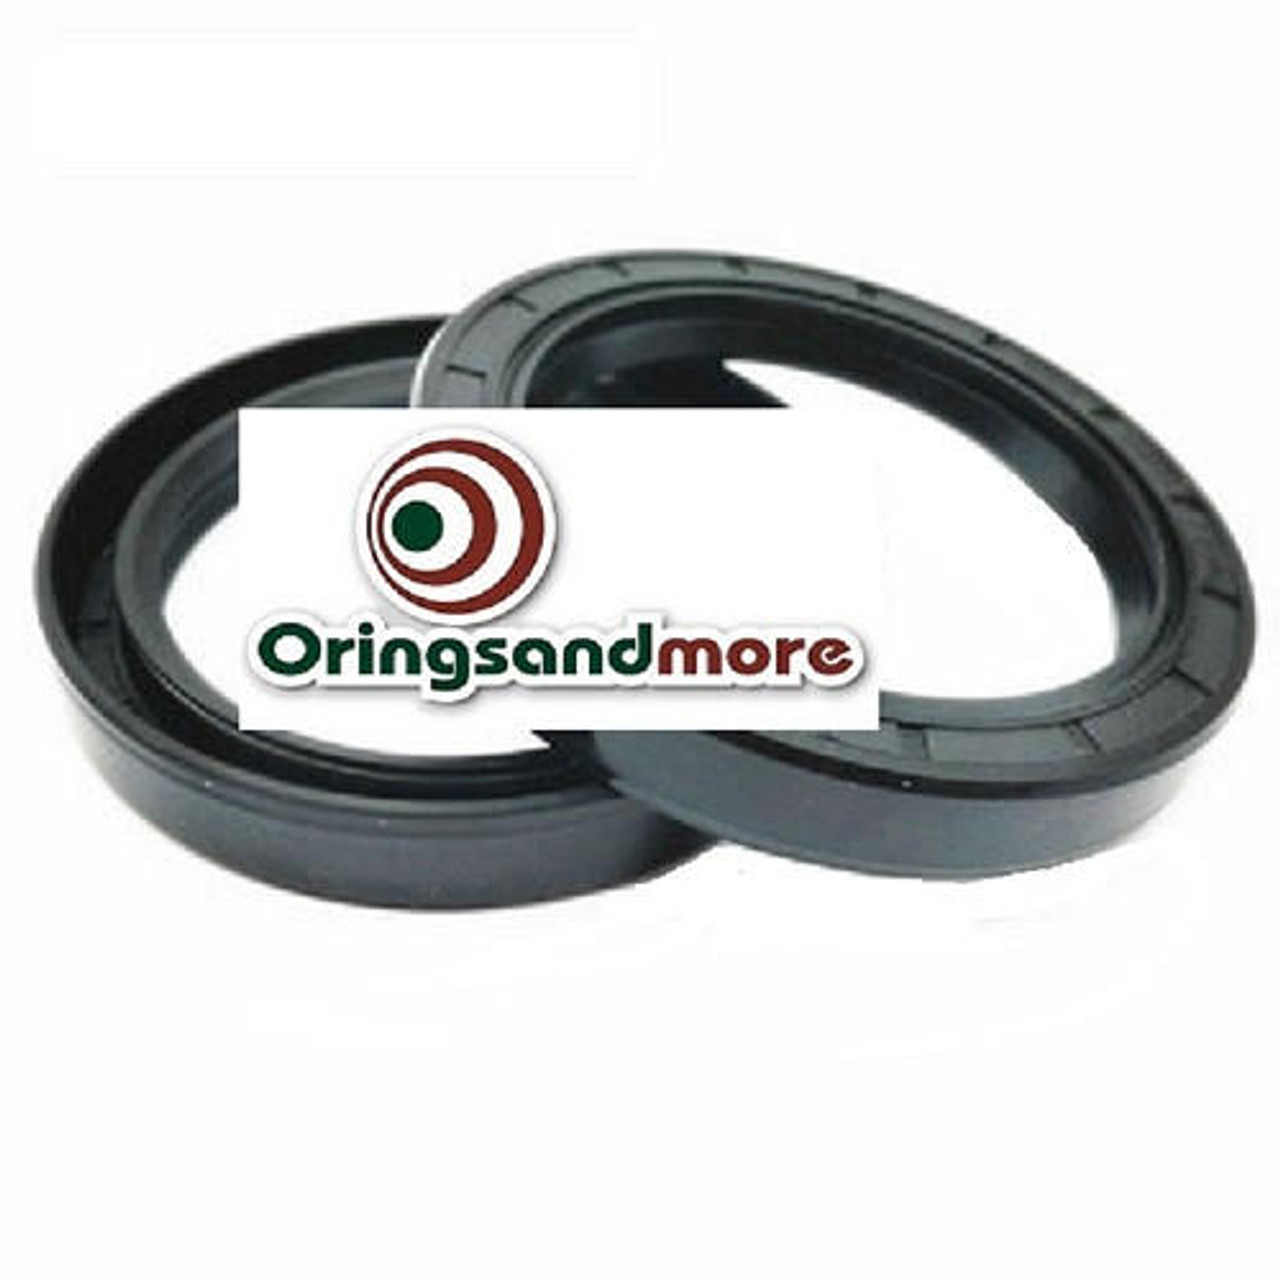 Metric Oil Shaft Seal 85 x 110 x 12mm Double Lip   Price for 1 pc